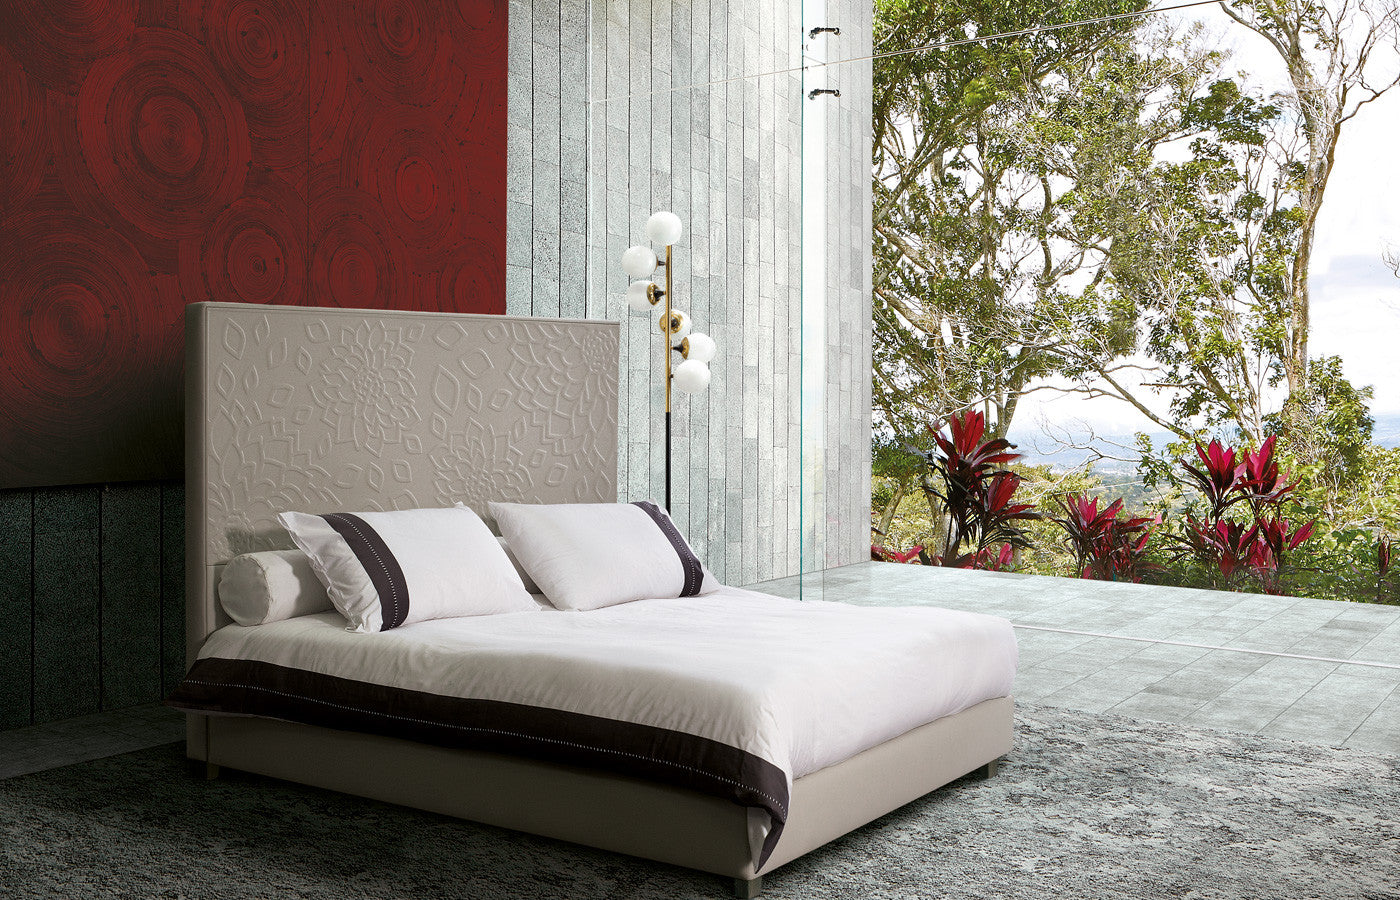 Luxury and precious elegant bed. leather headboard. Italian bed. handmade with natural materials. Made in italy.